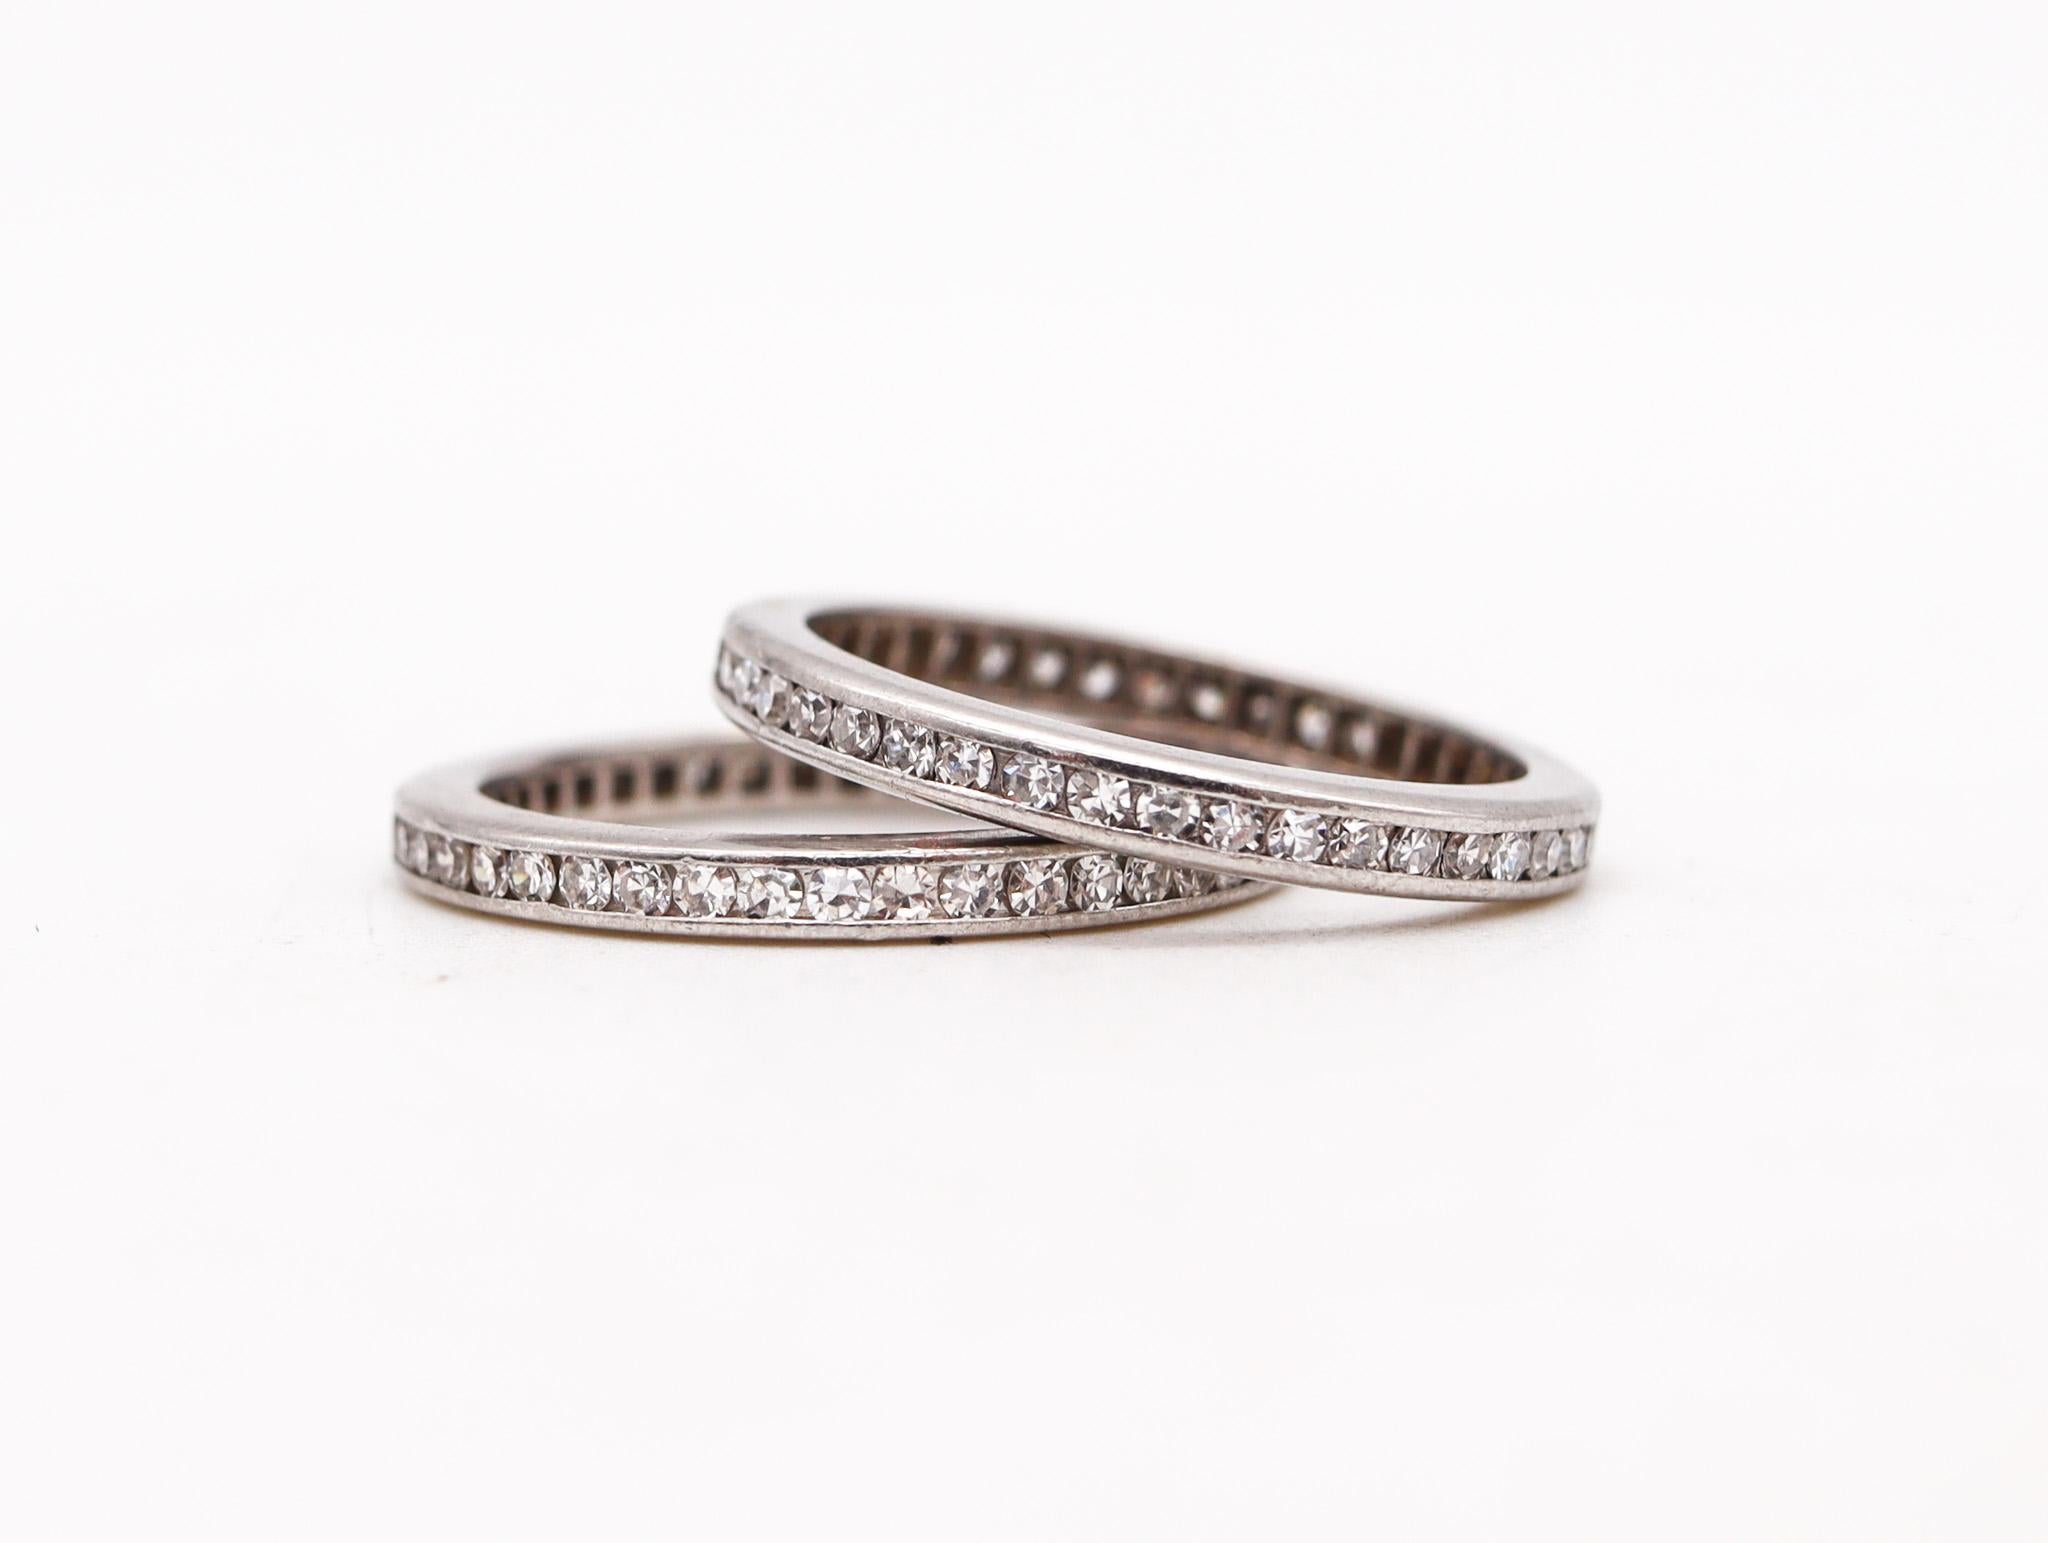 Duo of eternity rings with diamonds.

Very nice original pair of eternity band rings, created in America during the Art Deco period, back in the 1930. They was crafted in solid .900/.999 platinum with high polished finish and embellished with